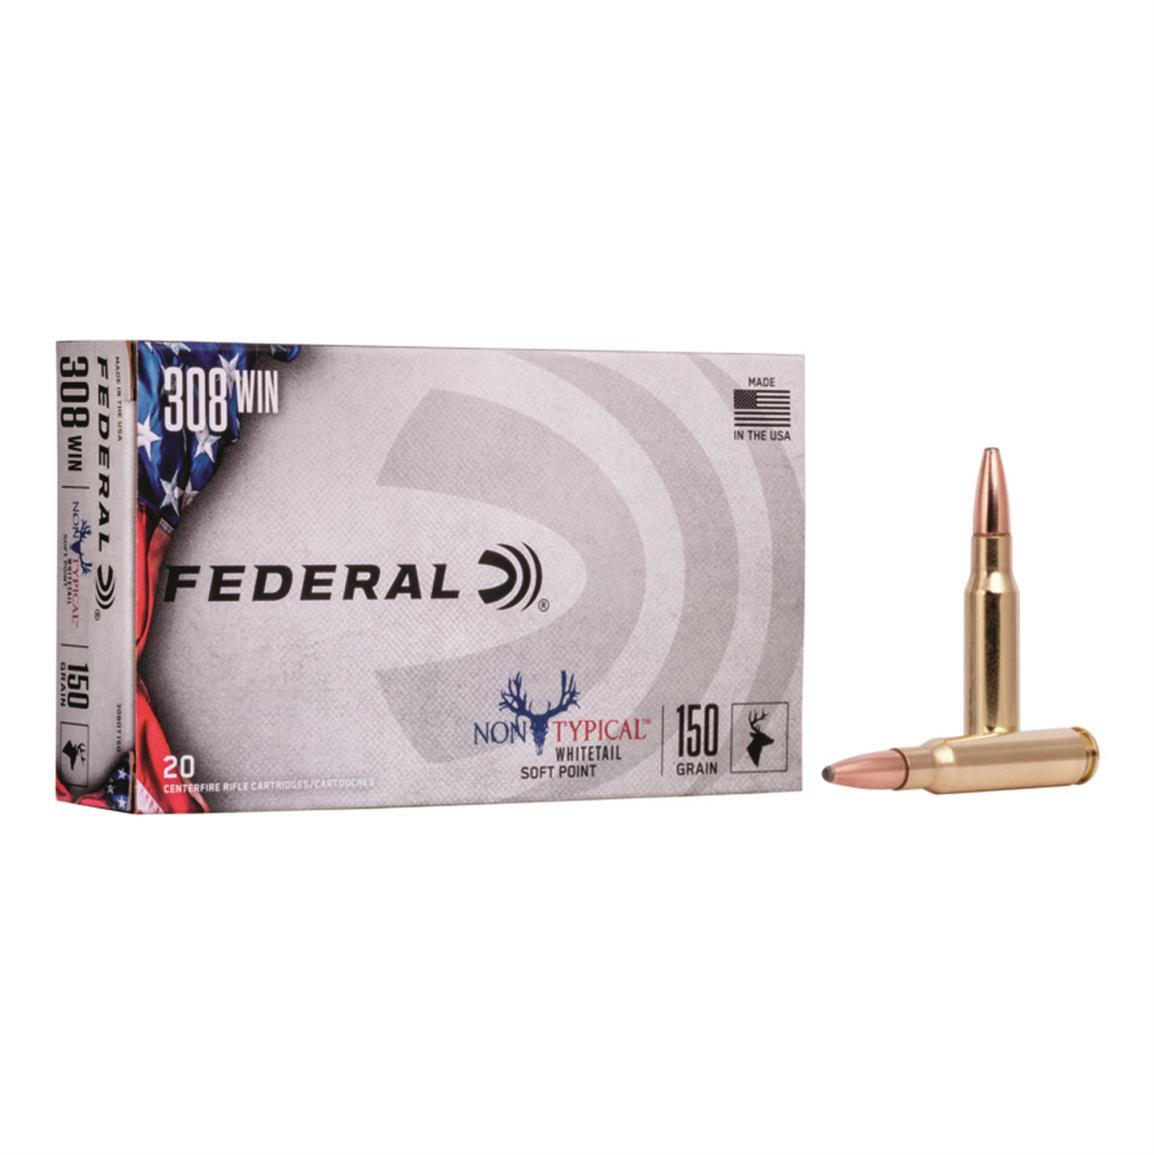 Federal, Non-Typical, .308 Winchester, SP, 150 Grain, 20 Rounds